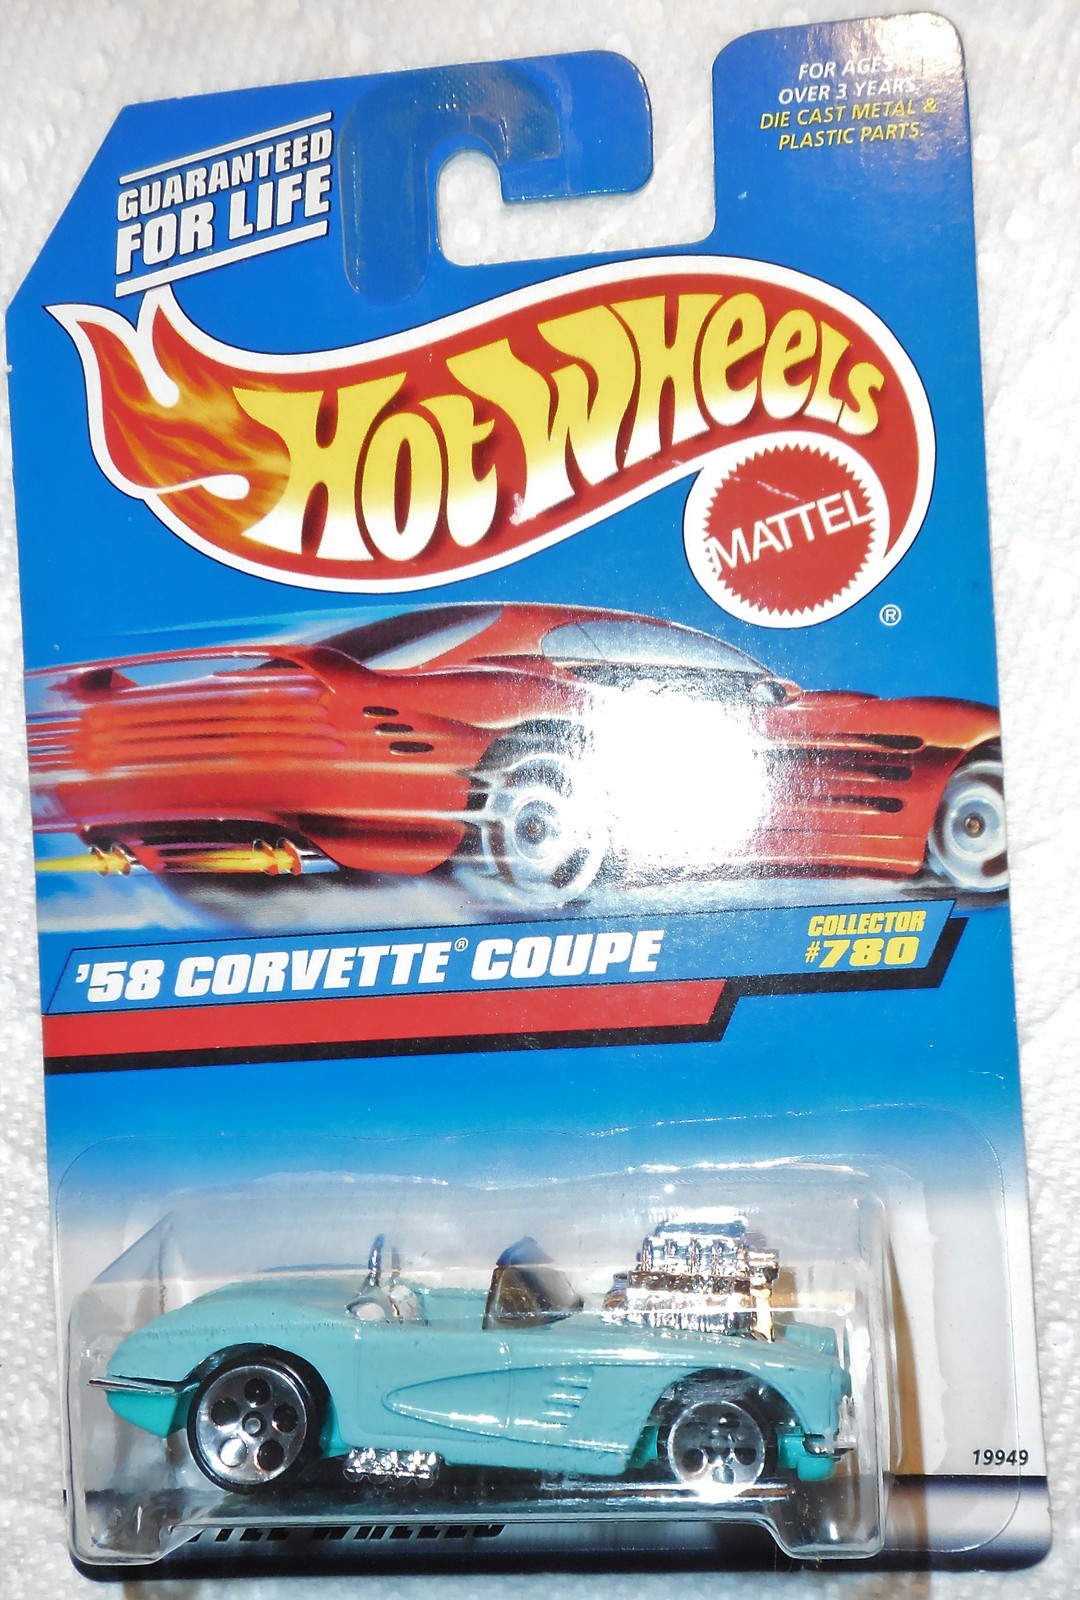 Hot Wheels 1998 Mattel Wheels "'58 Corvette Coupe" Collector #780 On Sealed Card - $7.50